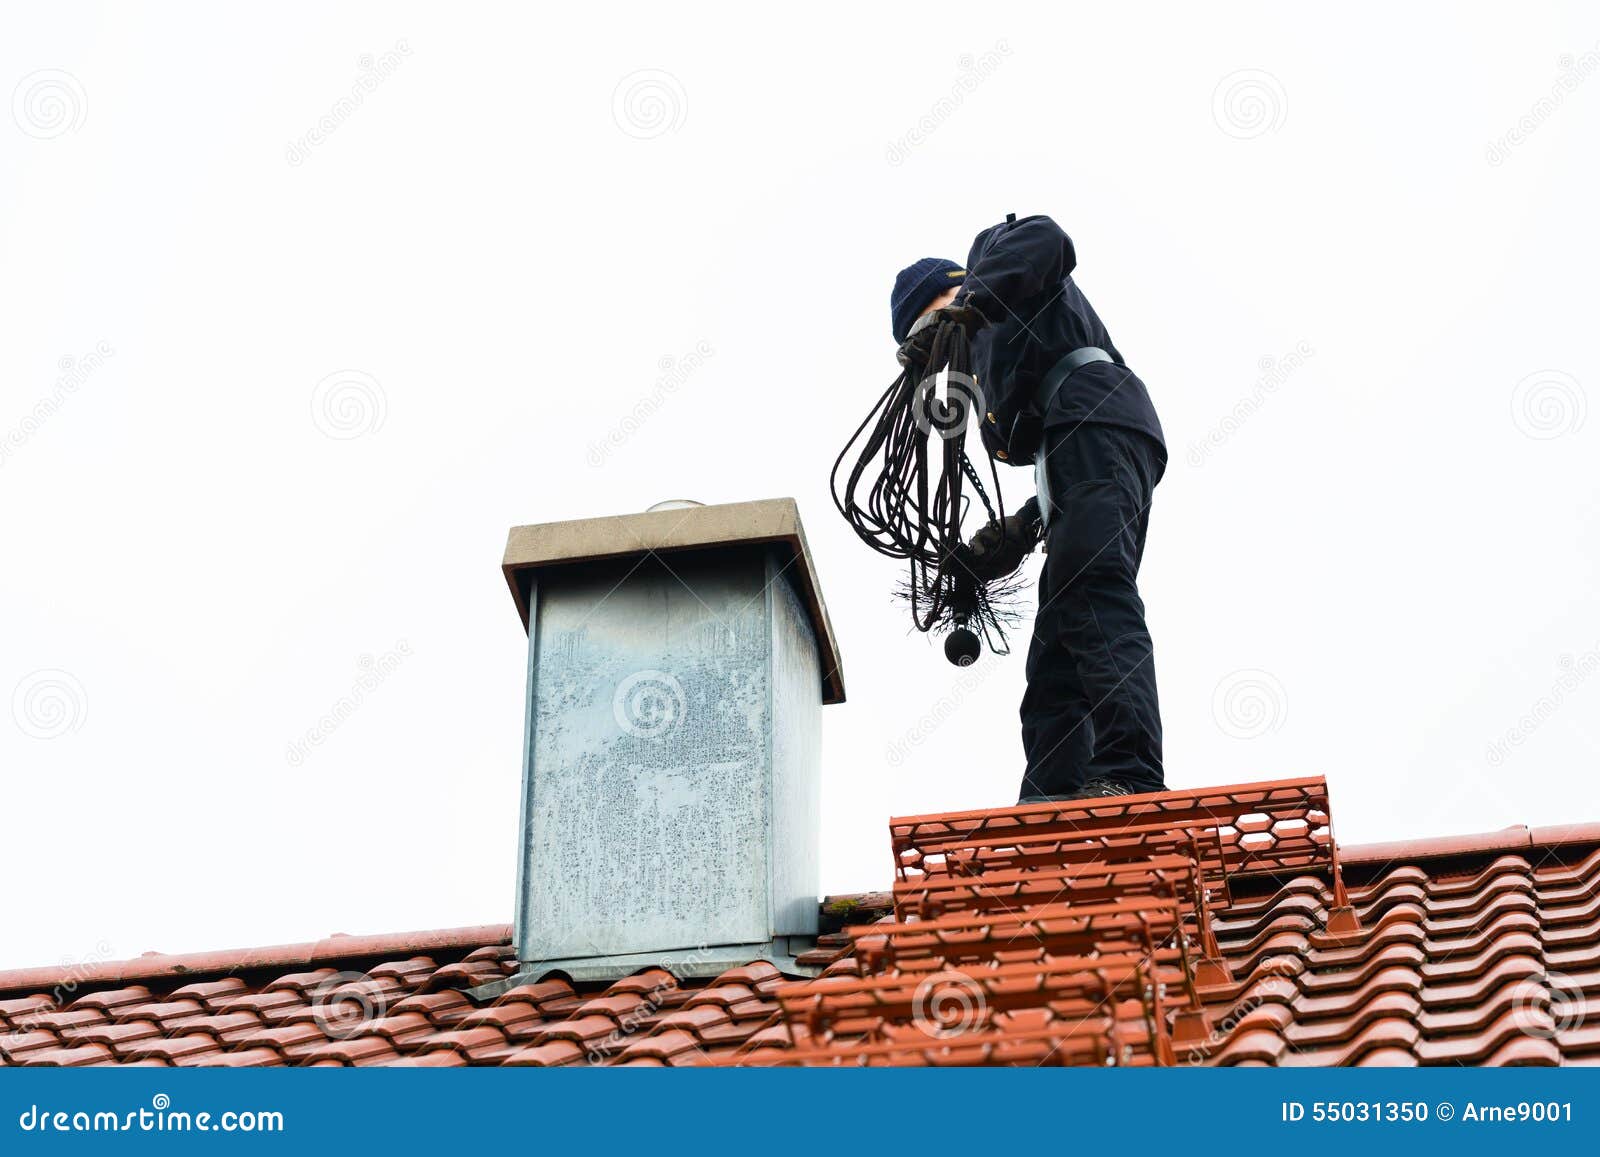 chimney sweep on roof of home working